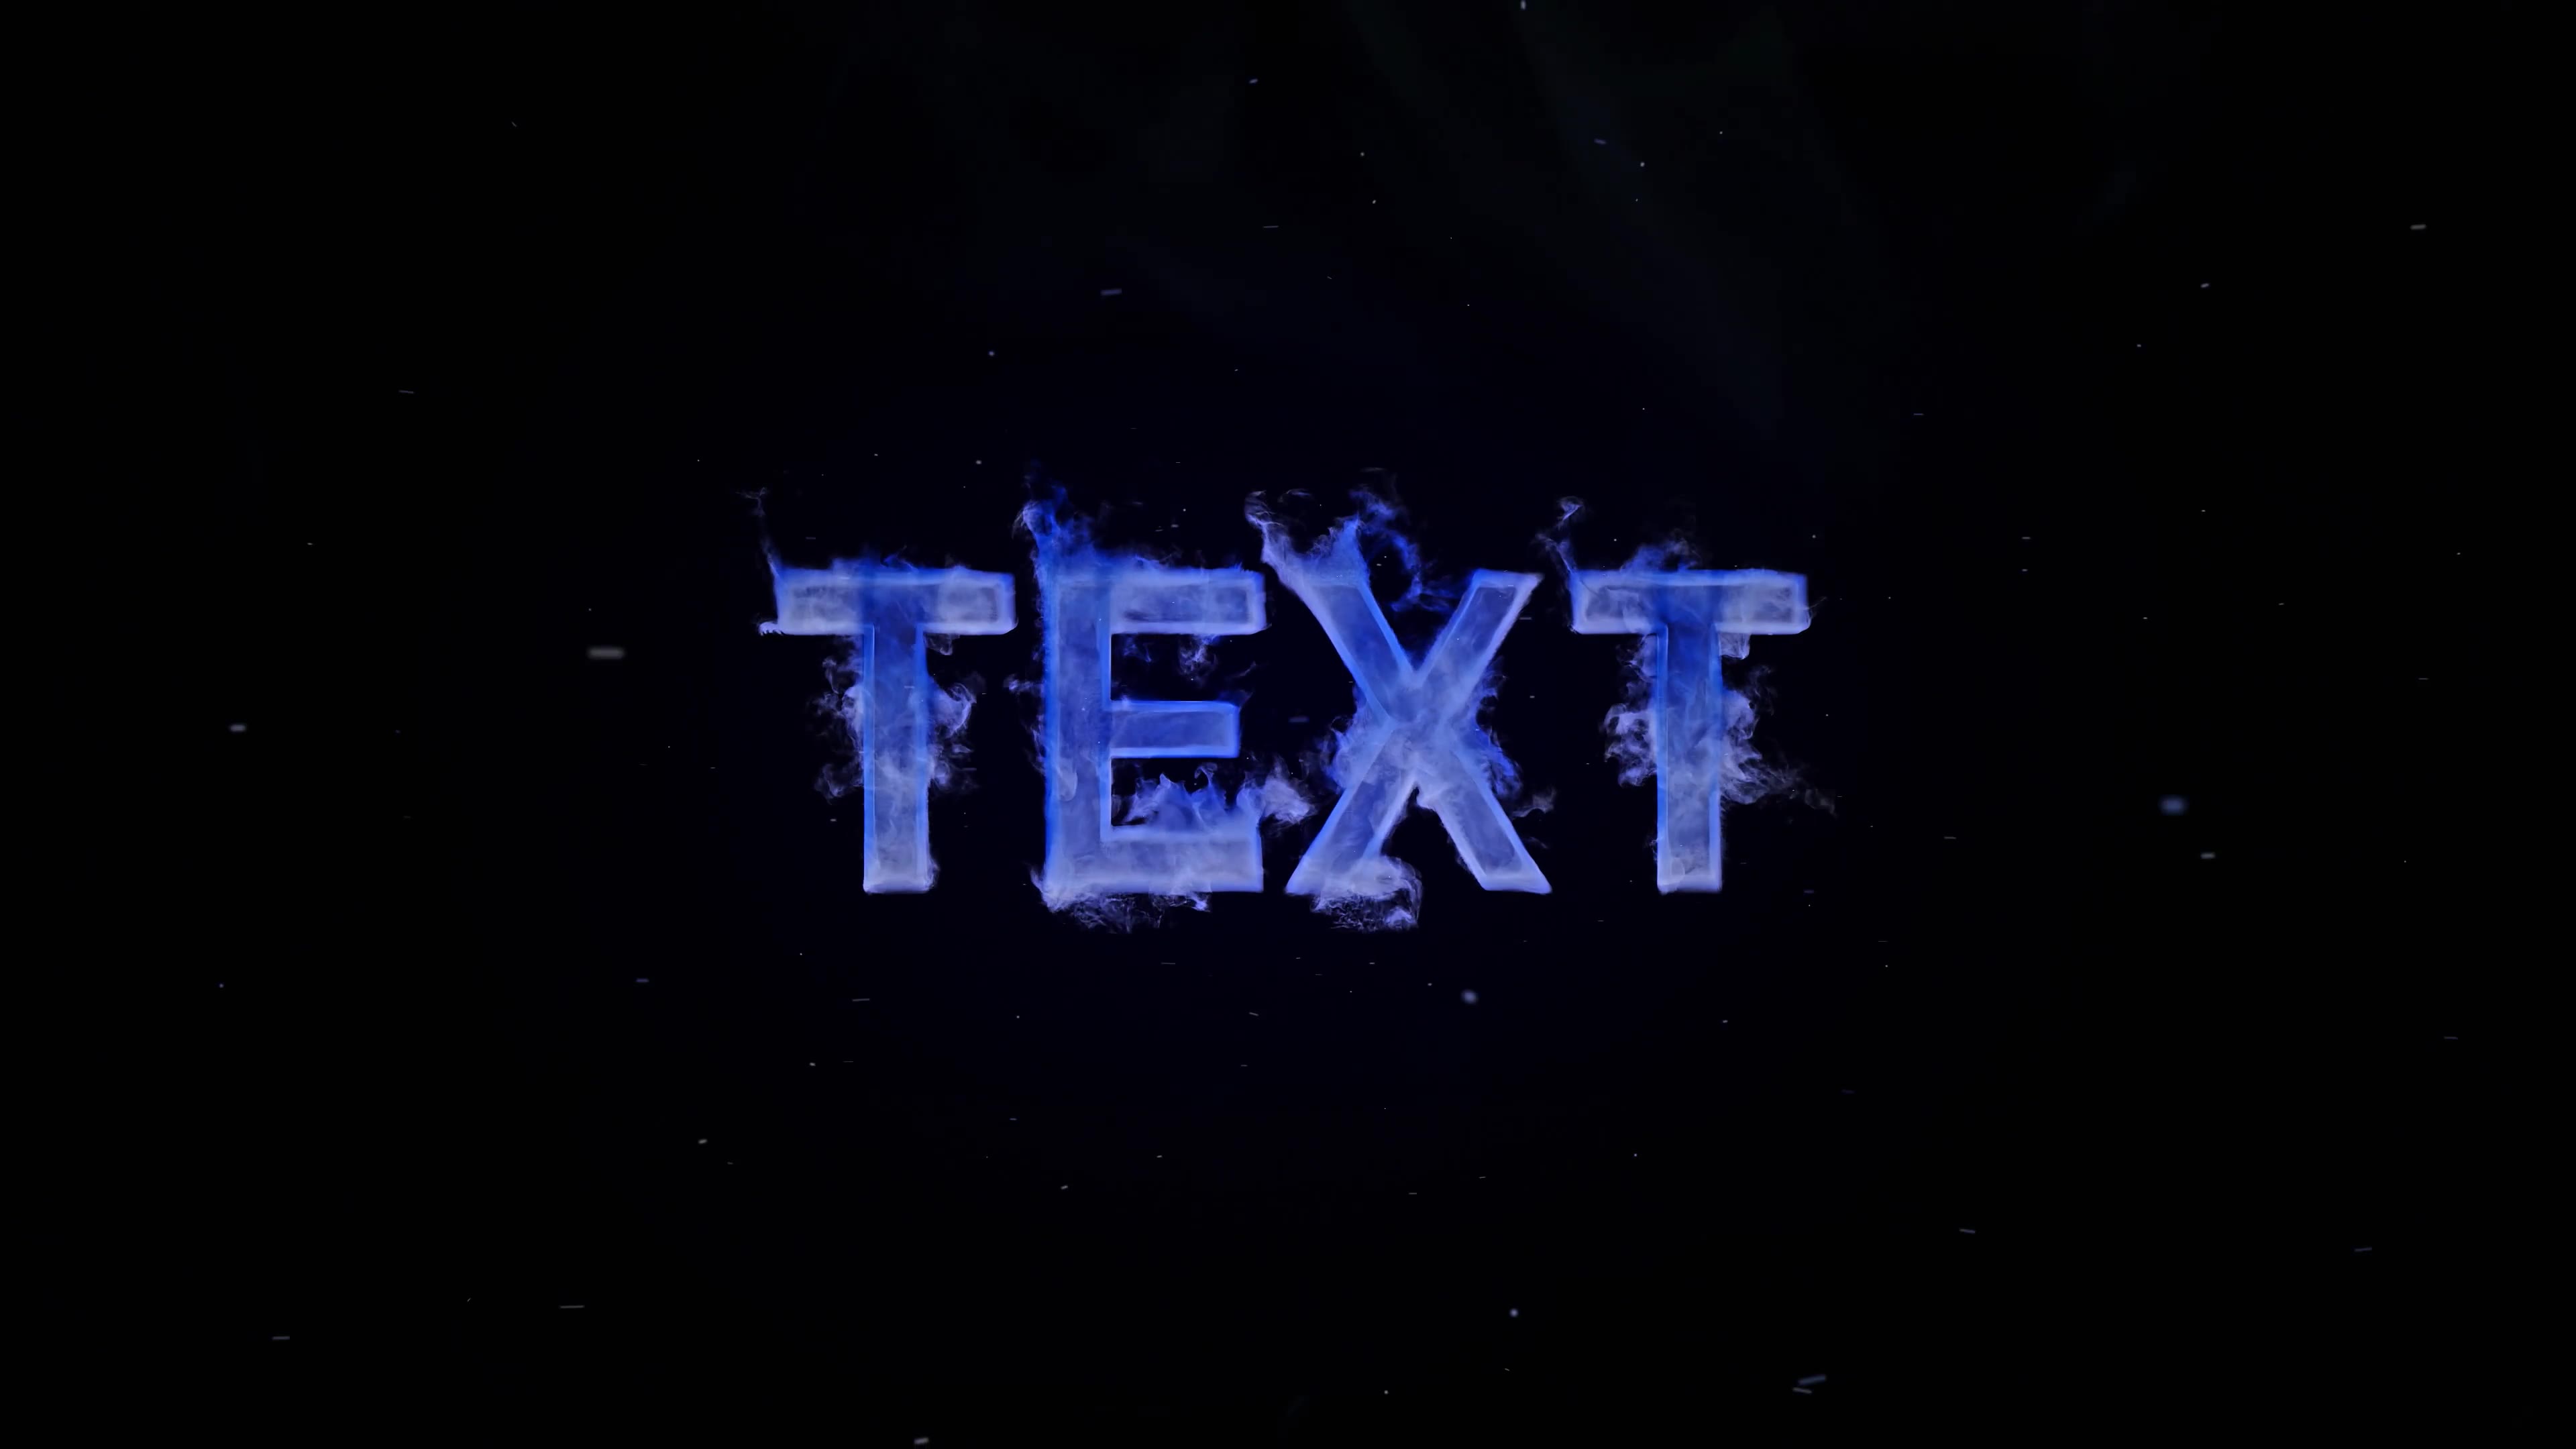 after effect smoke text effect download